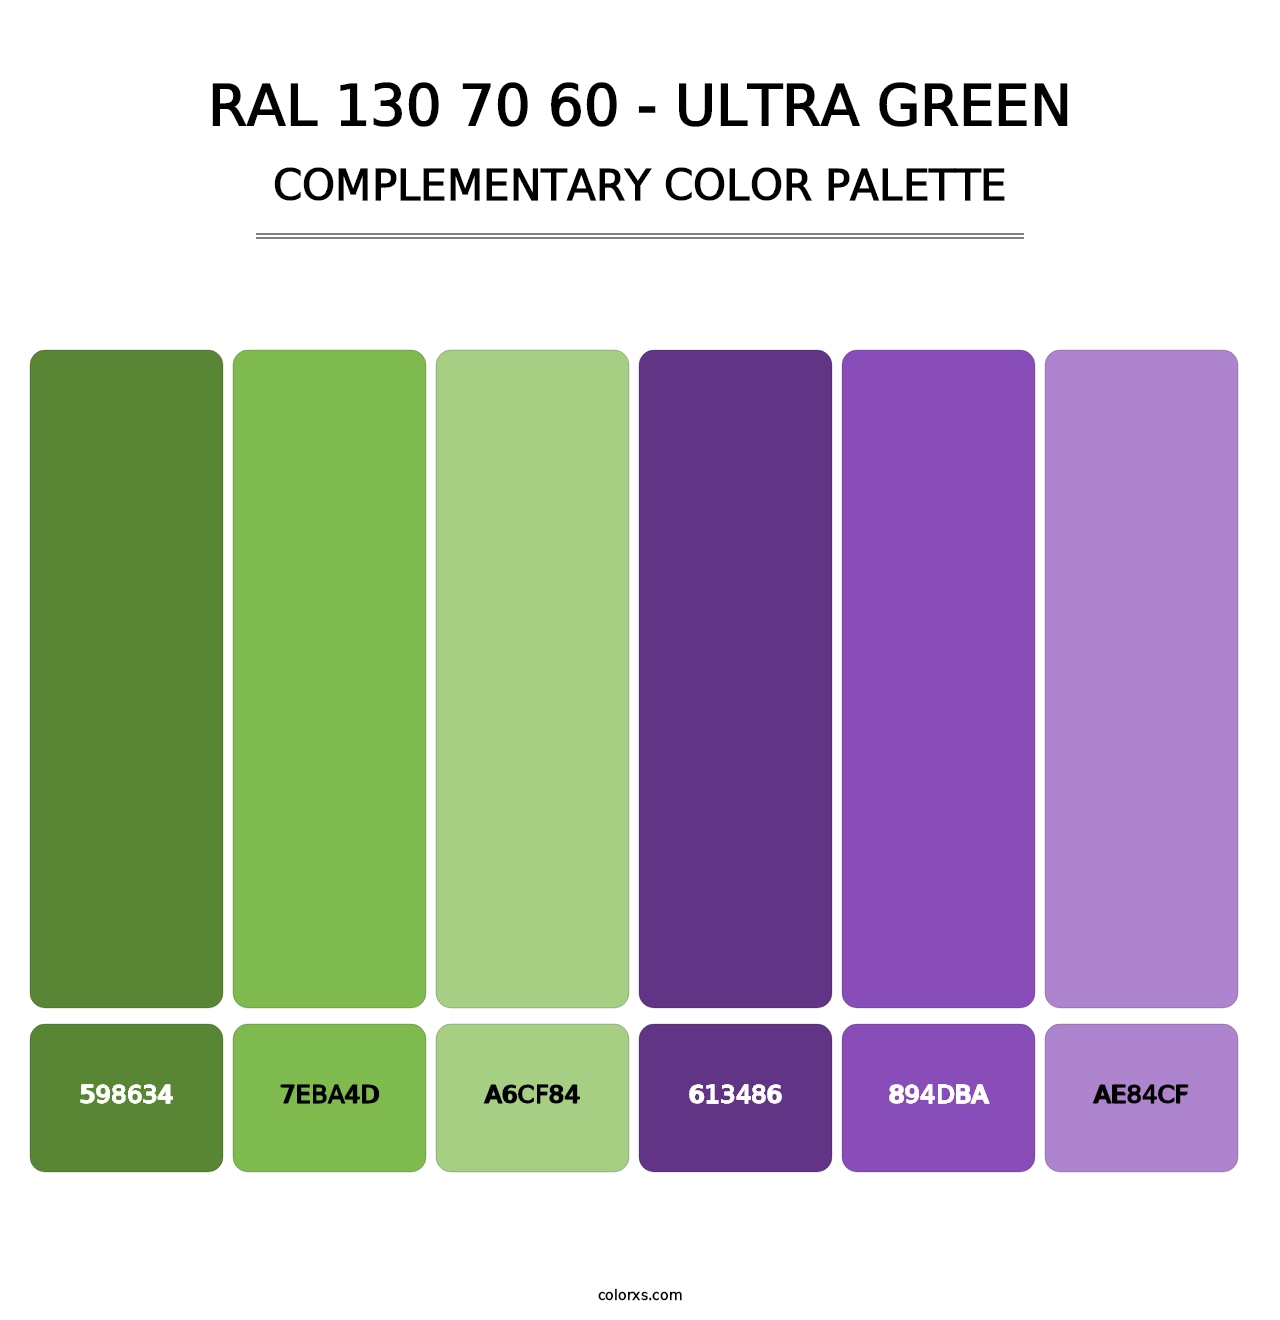 RAL 130 70 60 - Ultra Green - Complementary Color Palette